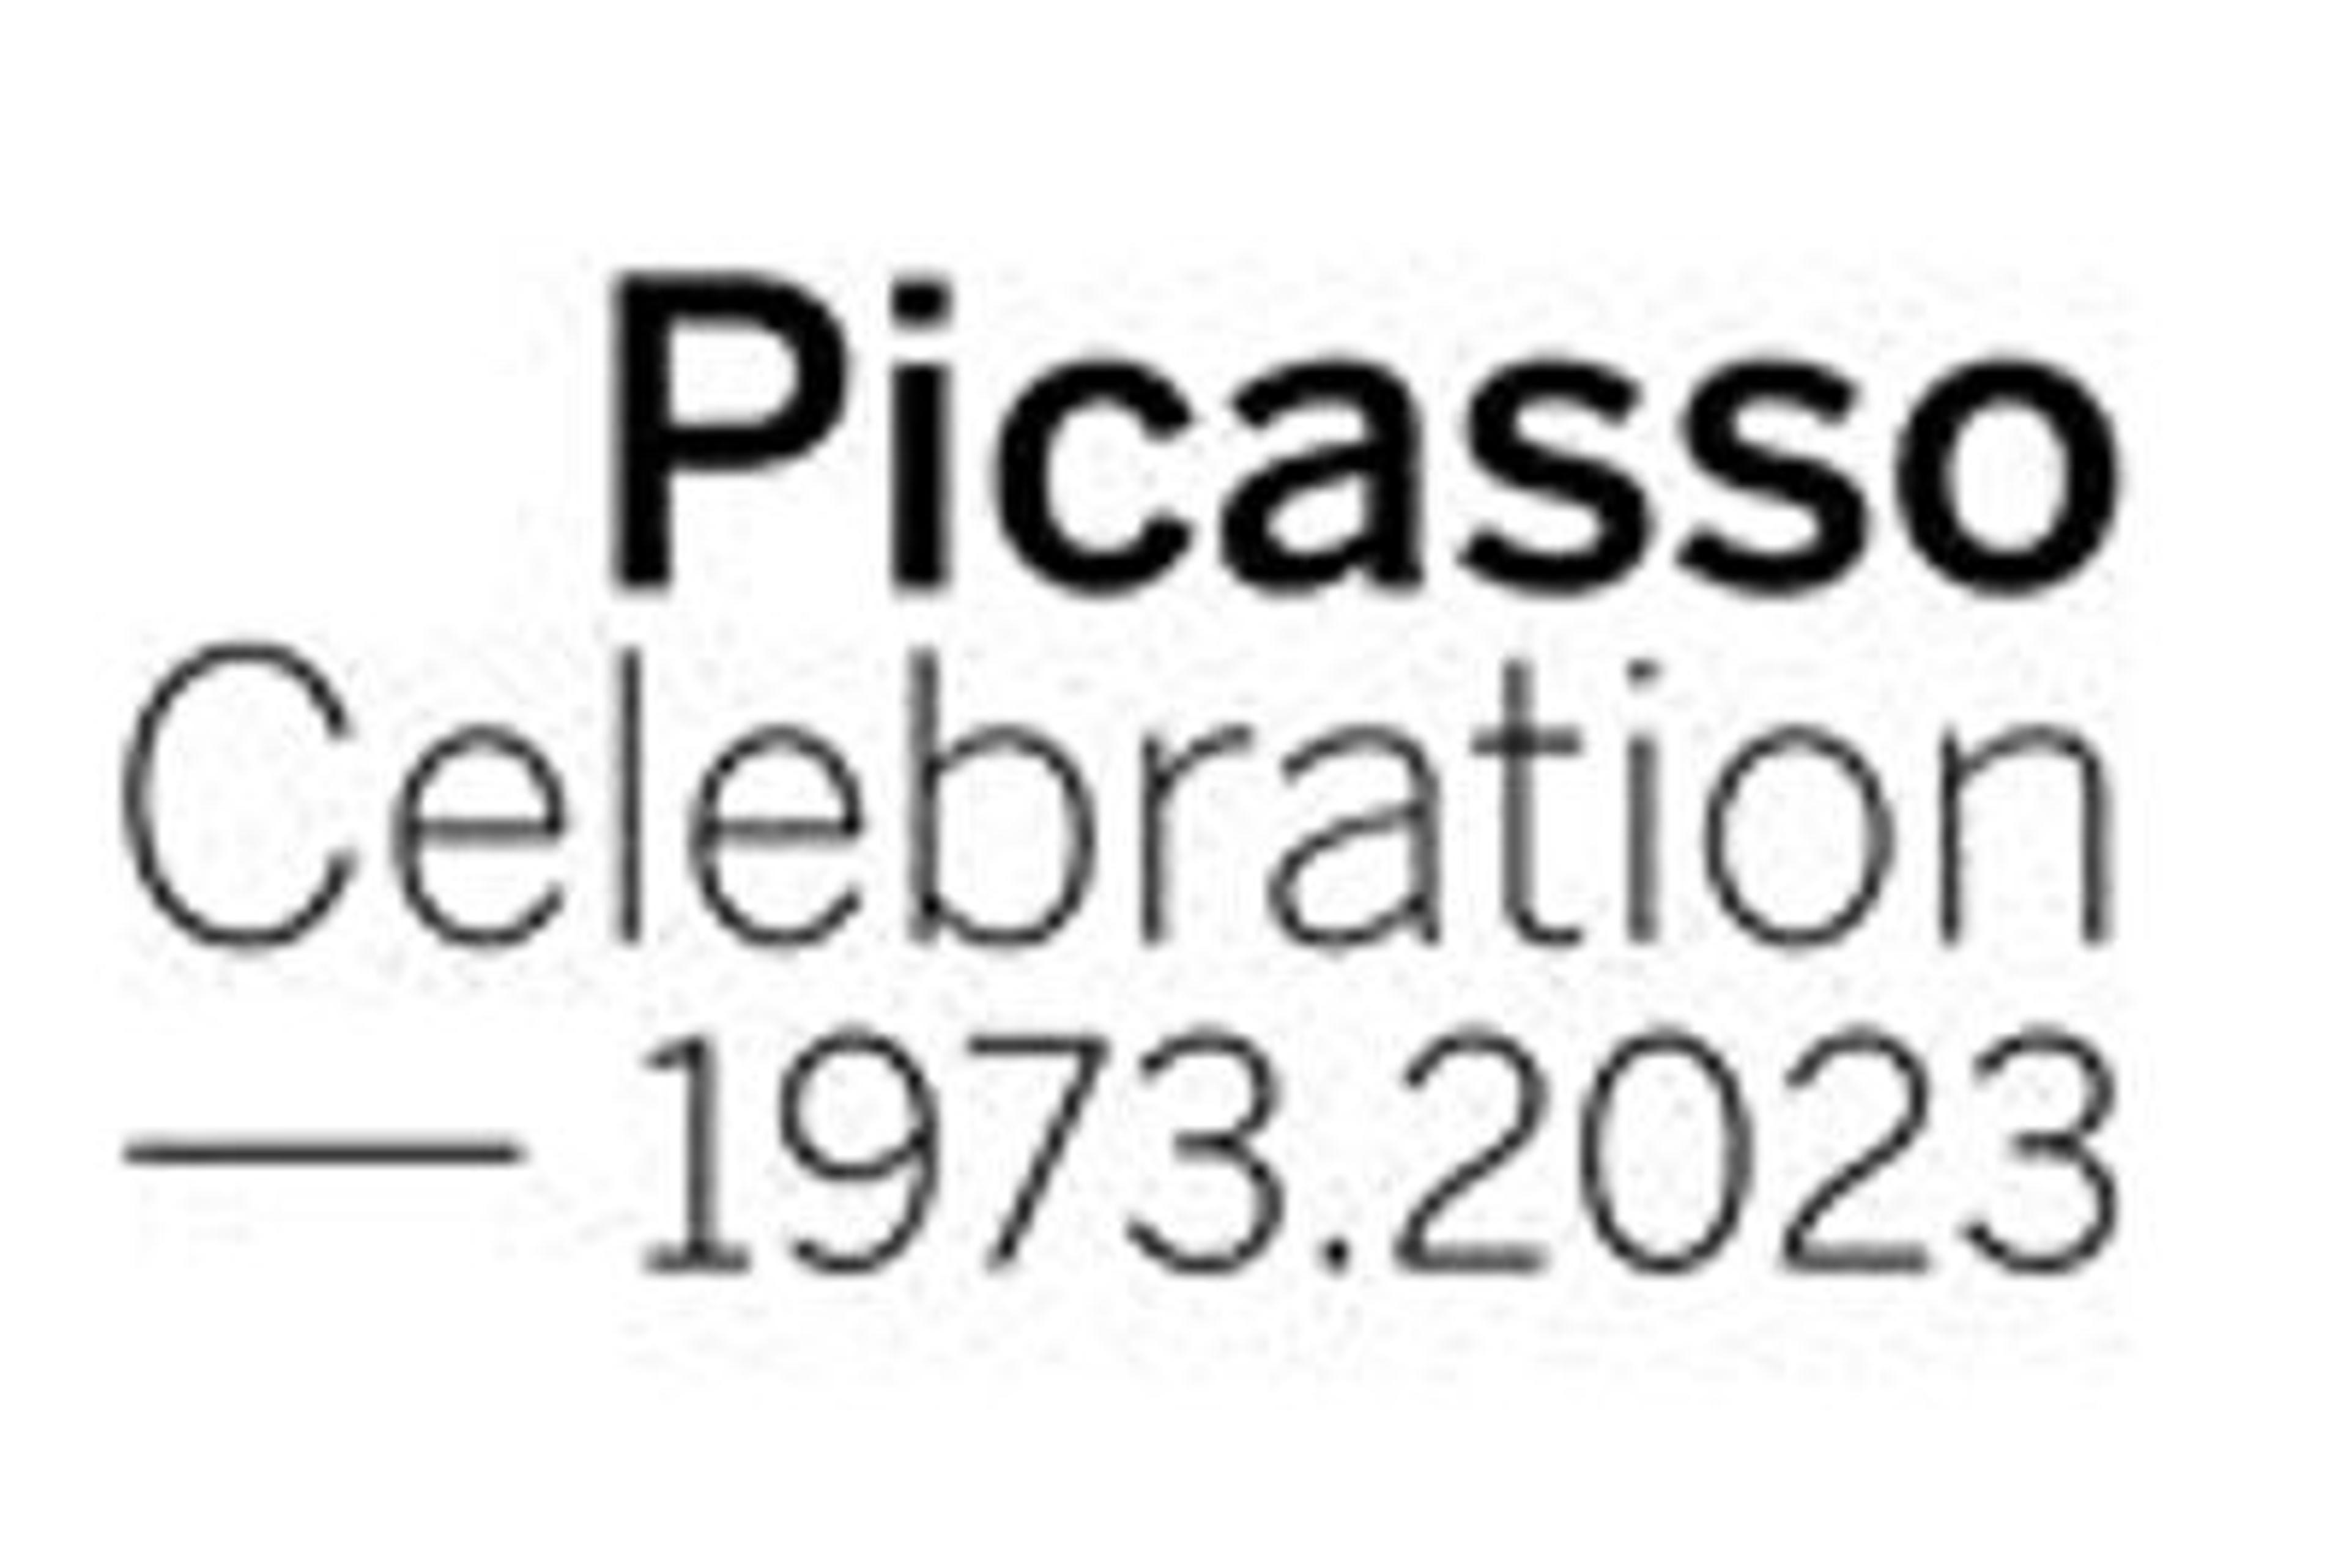 Logo that reads "Picasso Celebration 1973.2023"